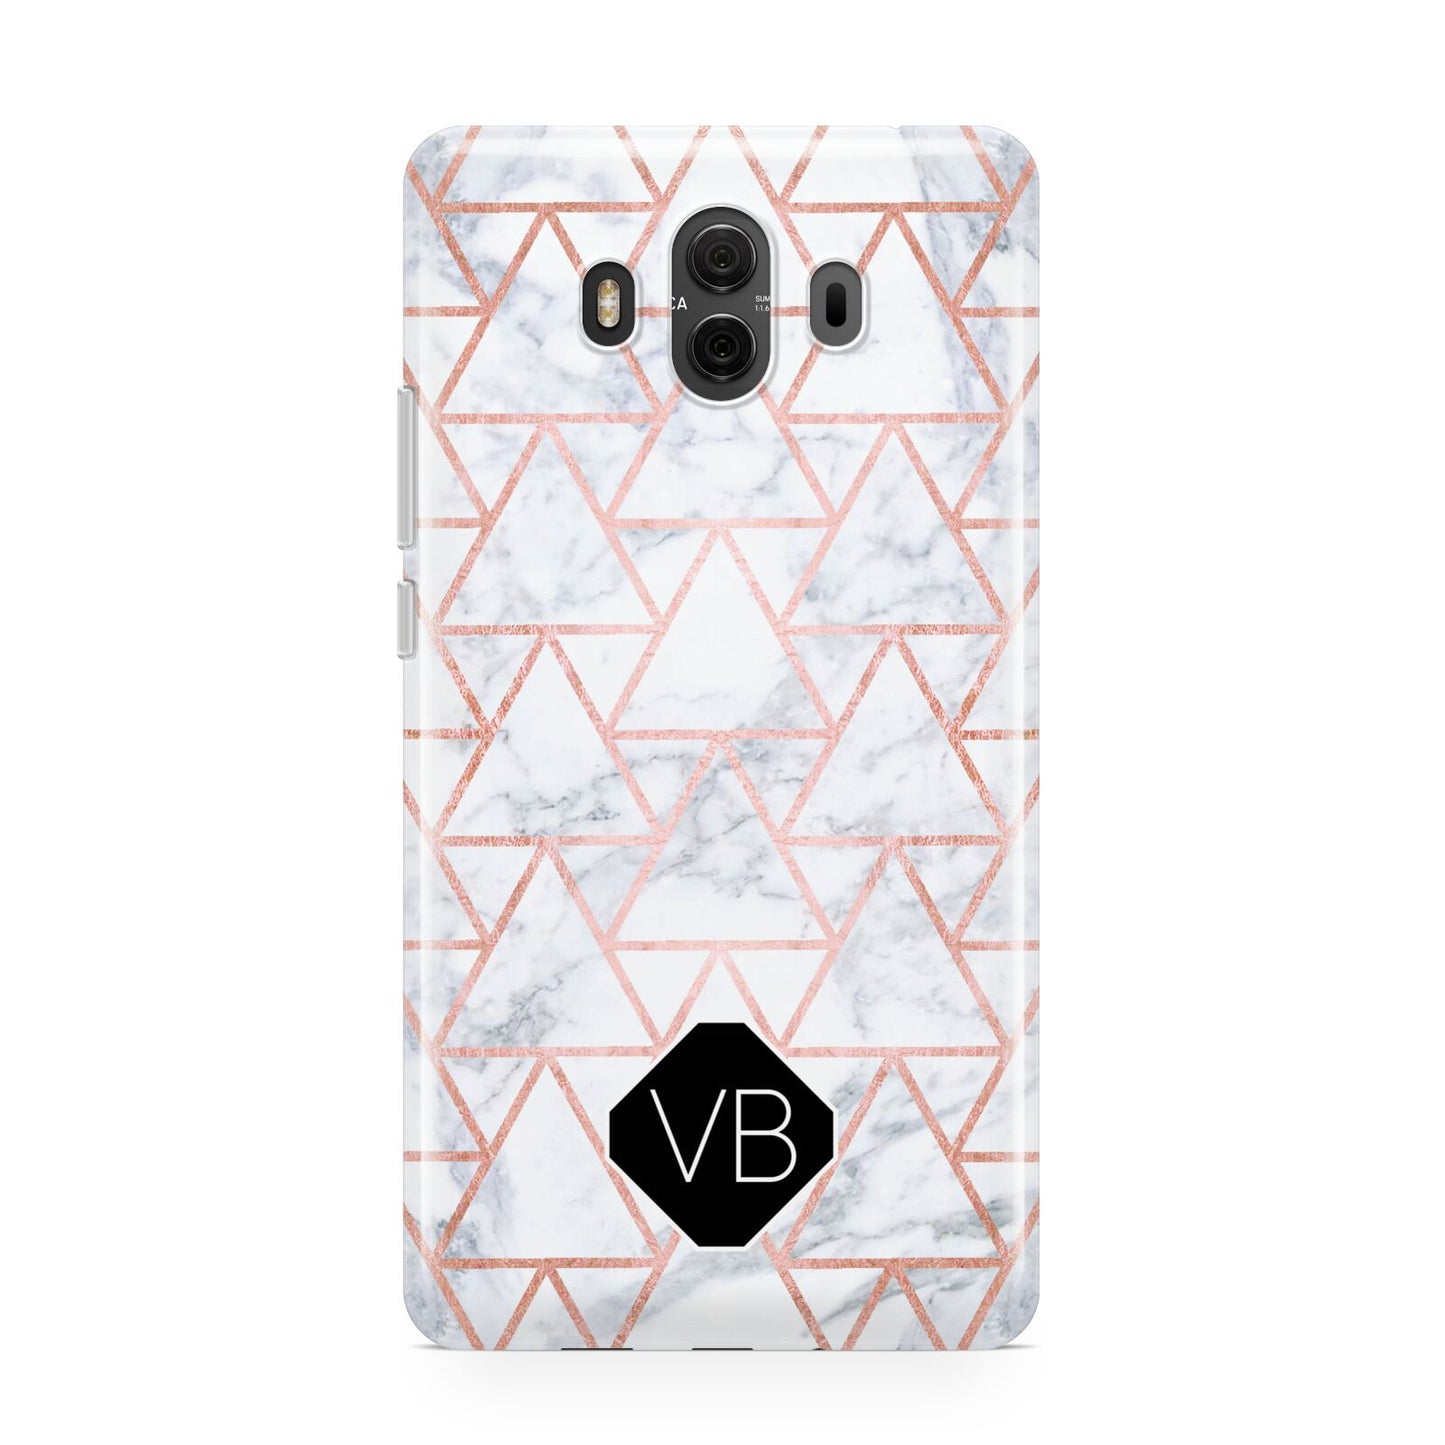 Personalised Rose Gold Grey Marble Hexagon Huawei Mate 10 Protective Phone Case